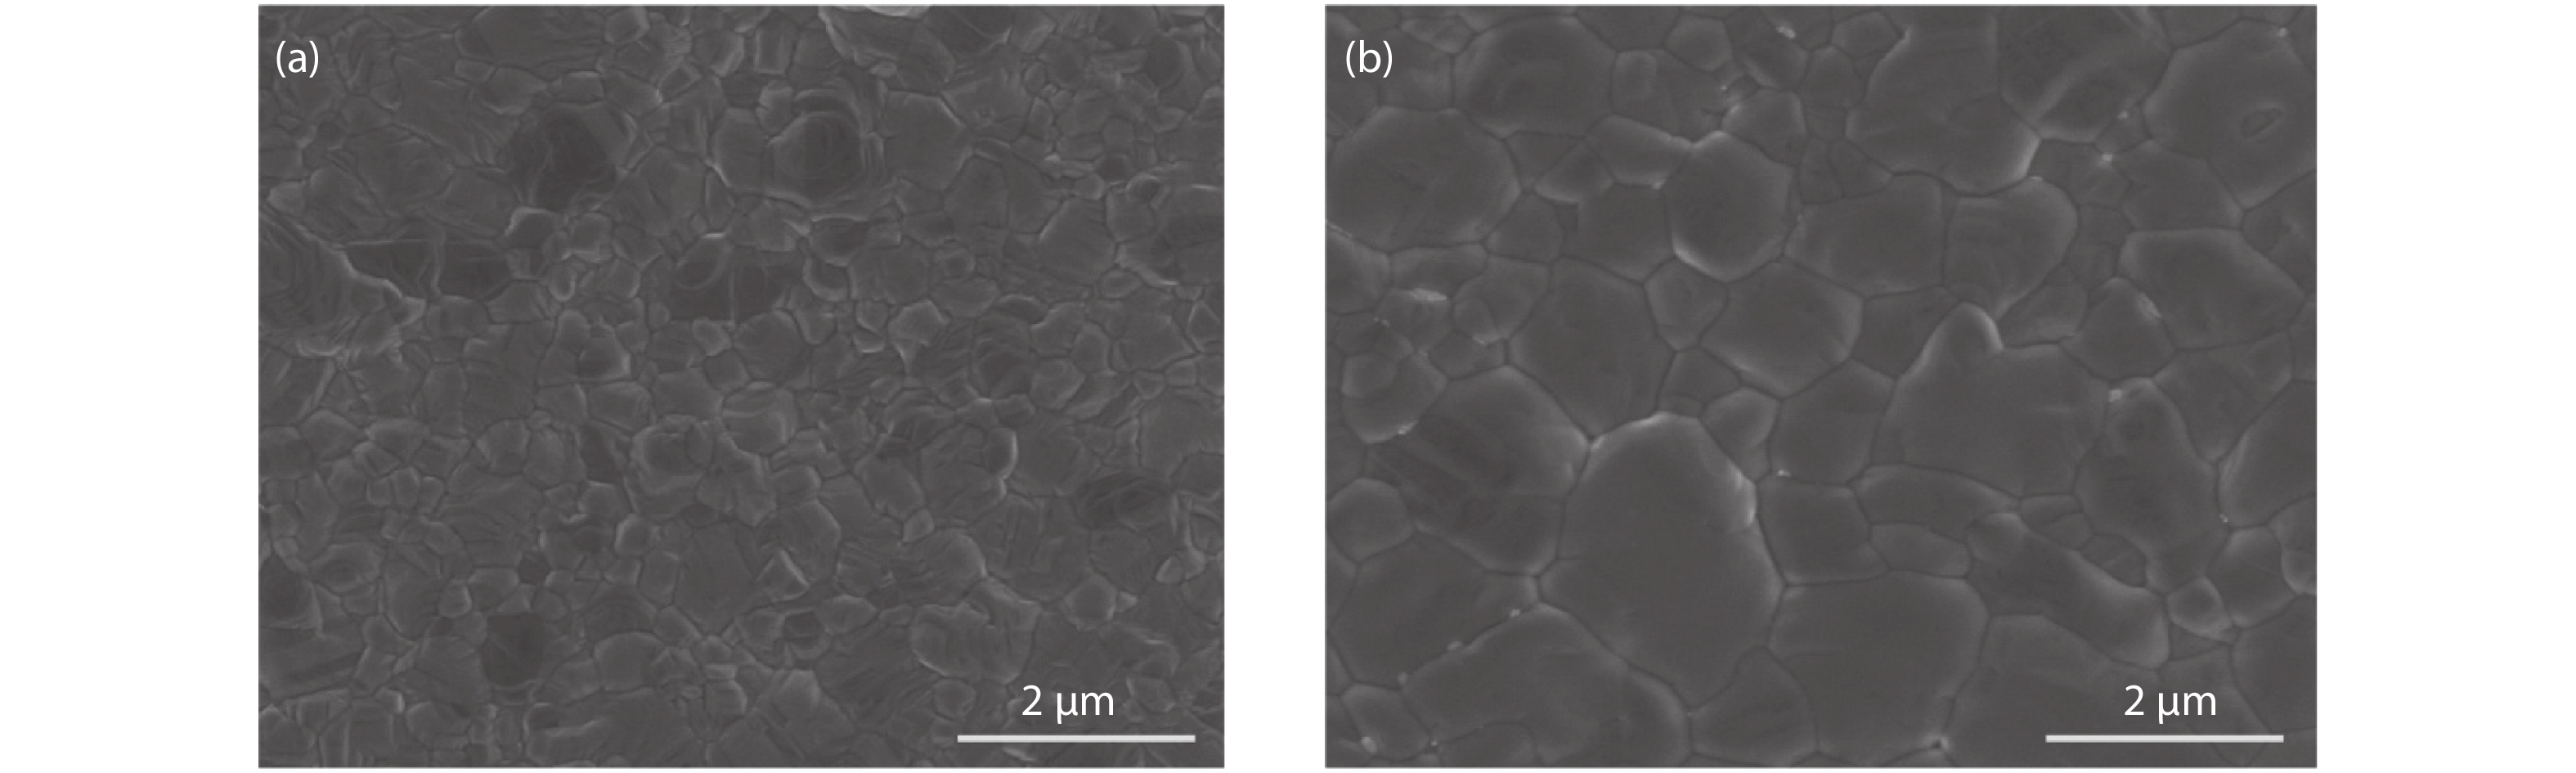 The morphology of perovskite films with and without Cd doping.